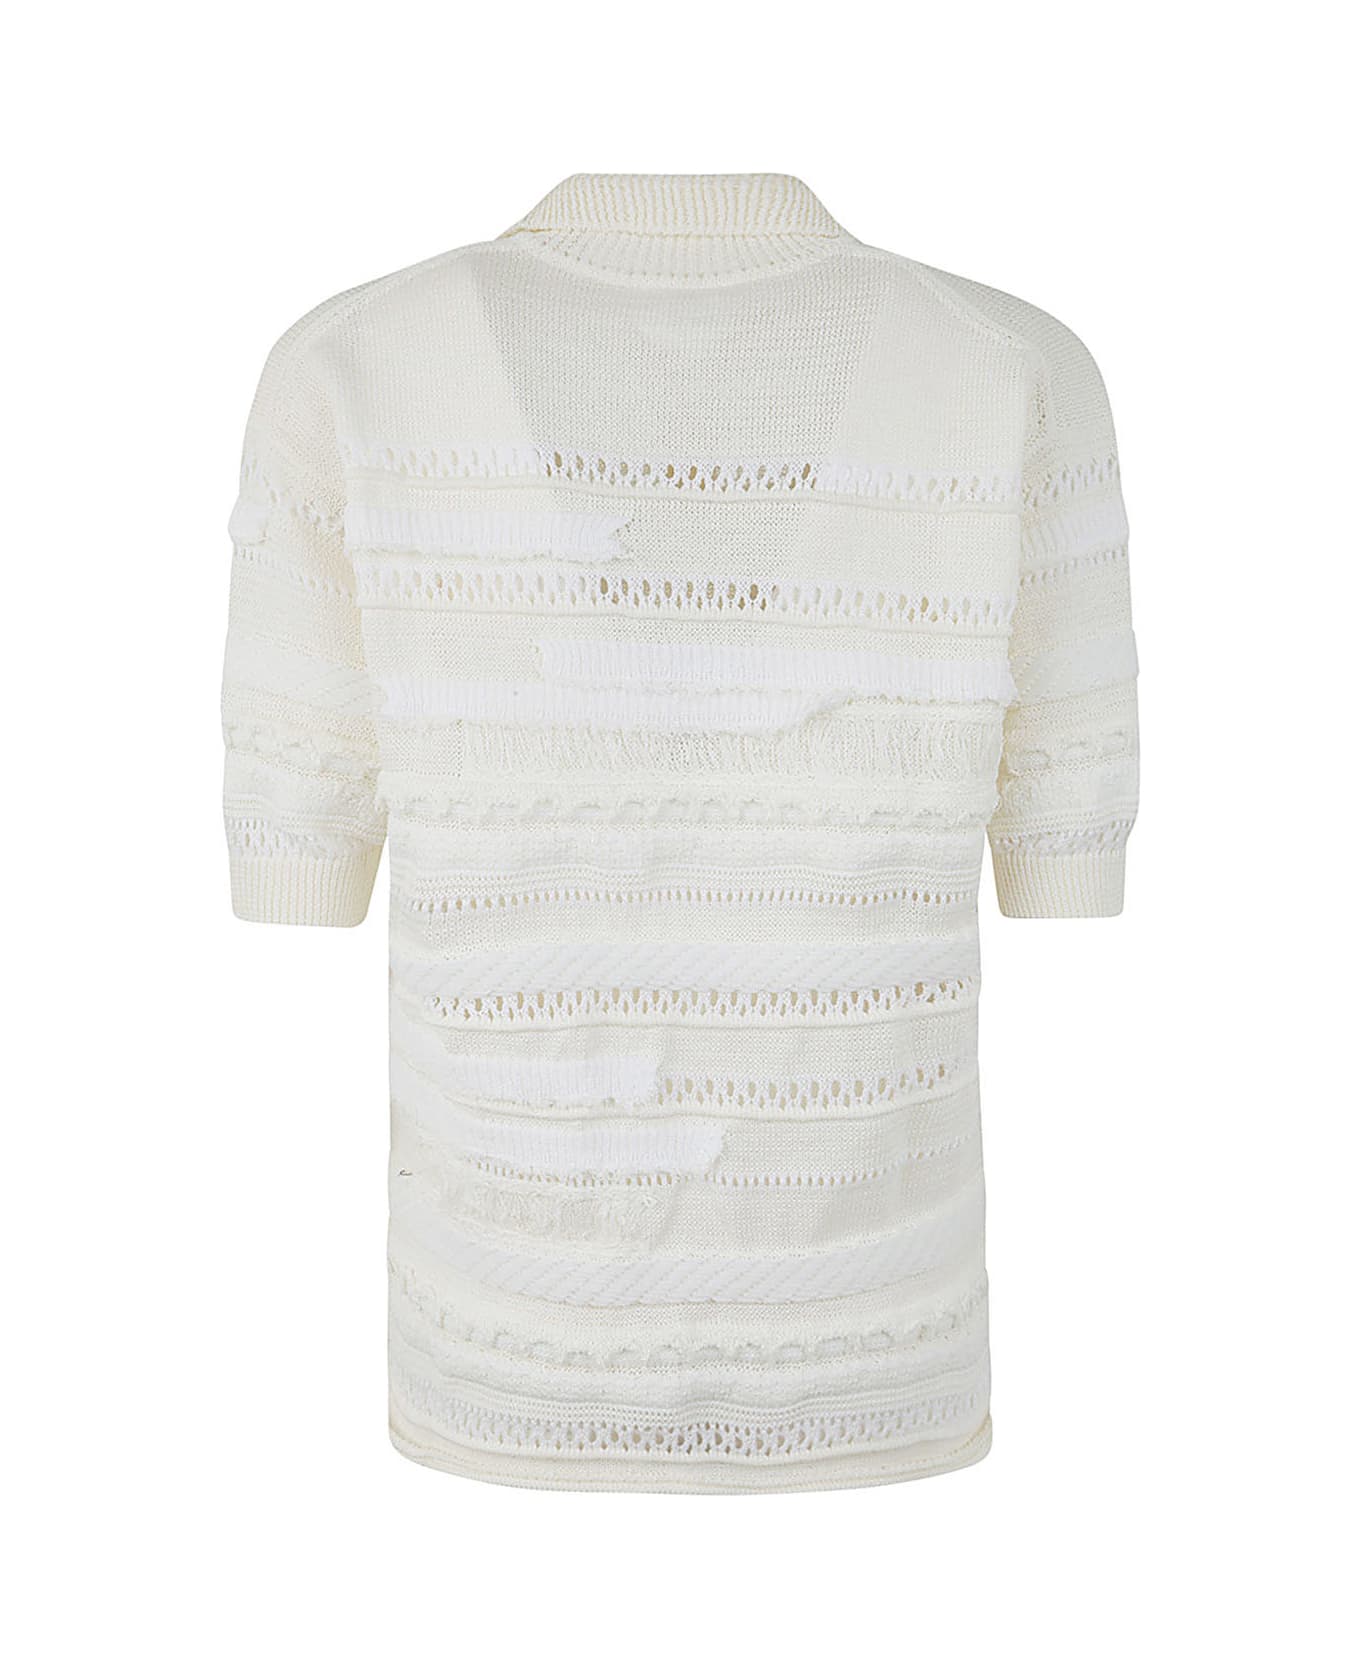 Y's Half Sleeve Pull Over With Collar - Off White ニットウェア